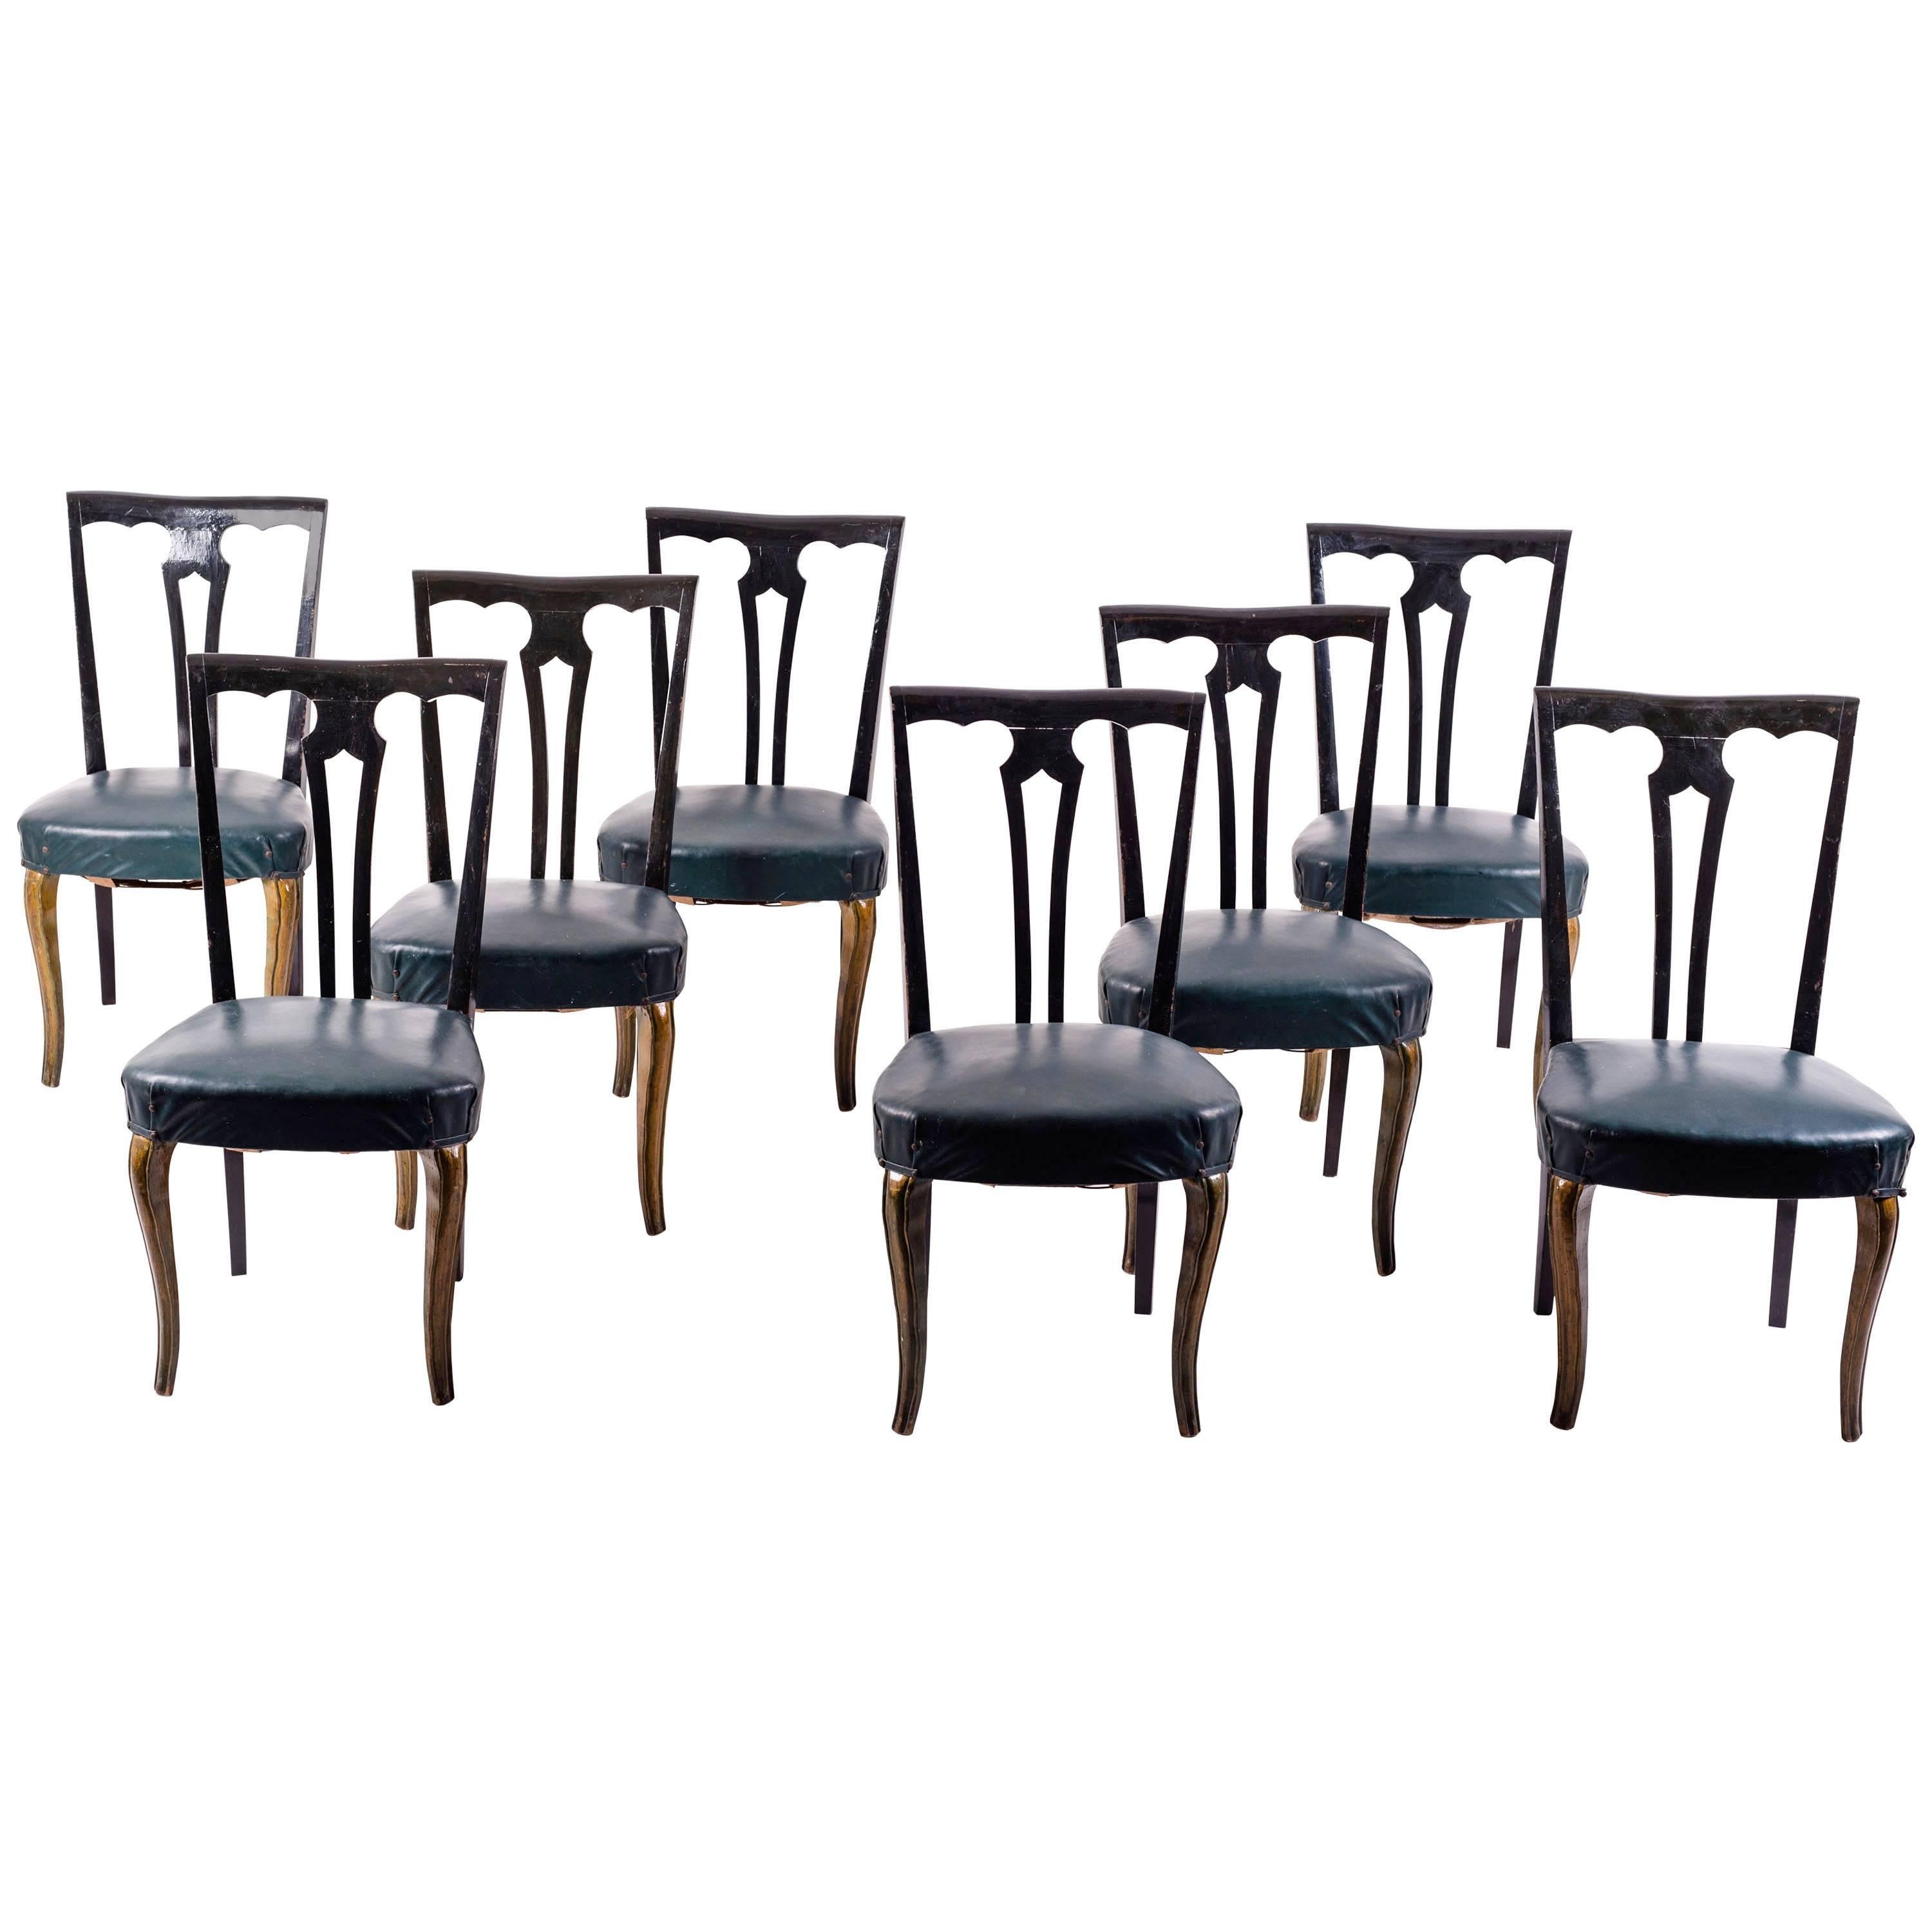 Set of Eight Italian Midcentury Painted Dining Room Chairs PierLuigi Colli 1940s For Sale